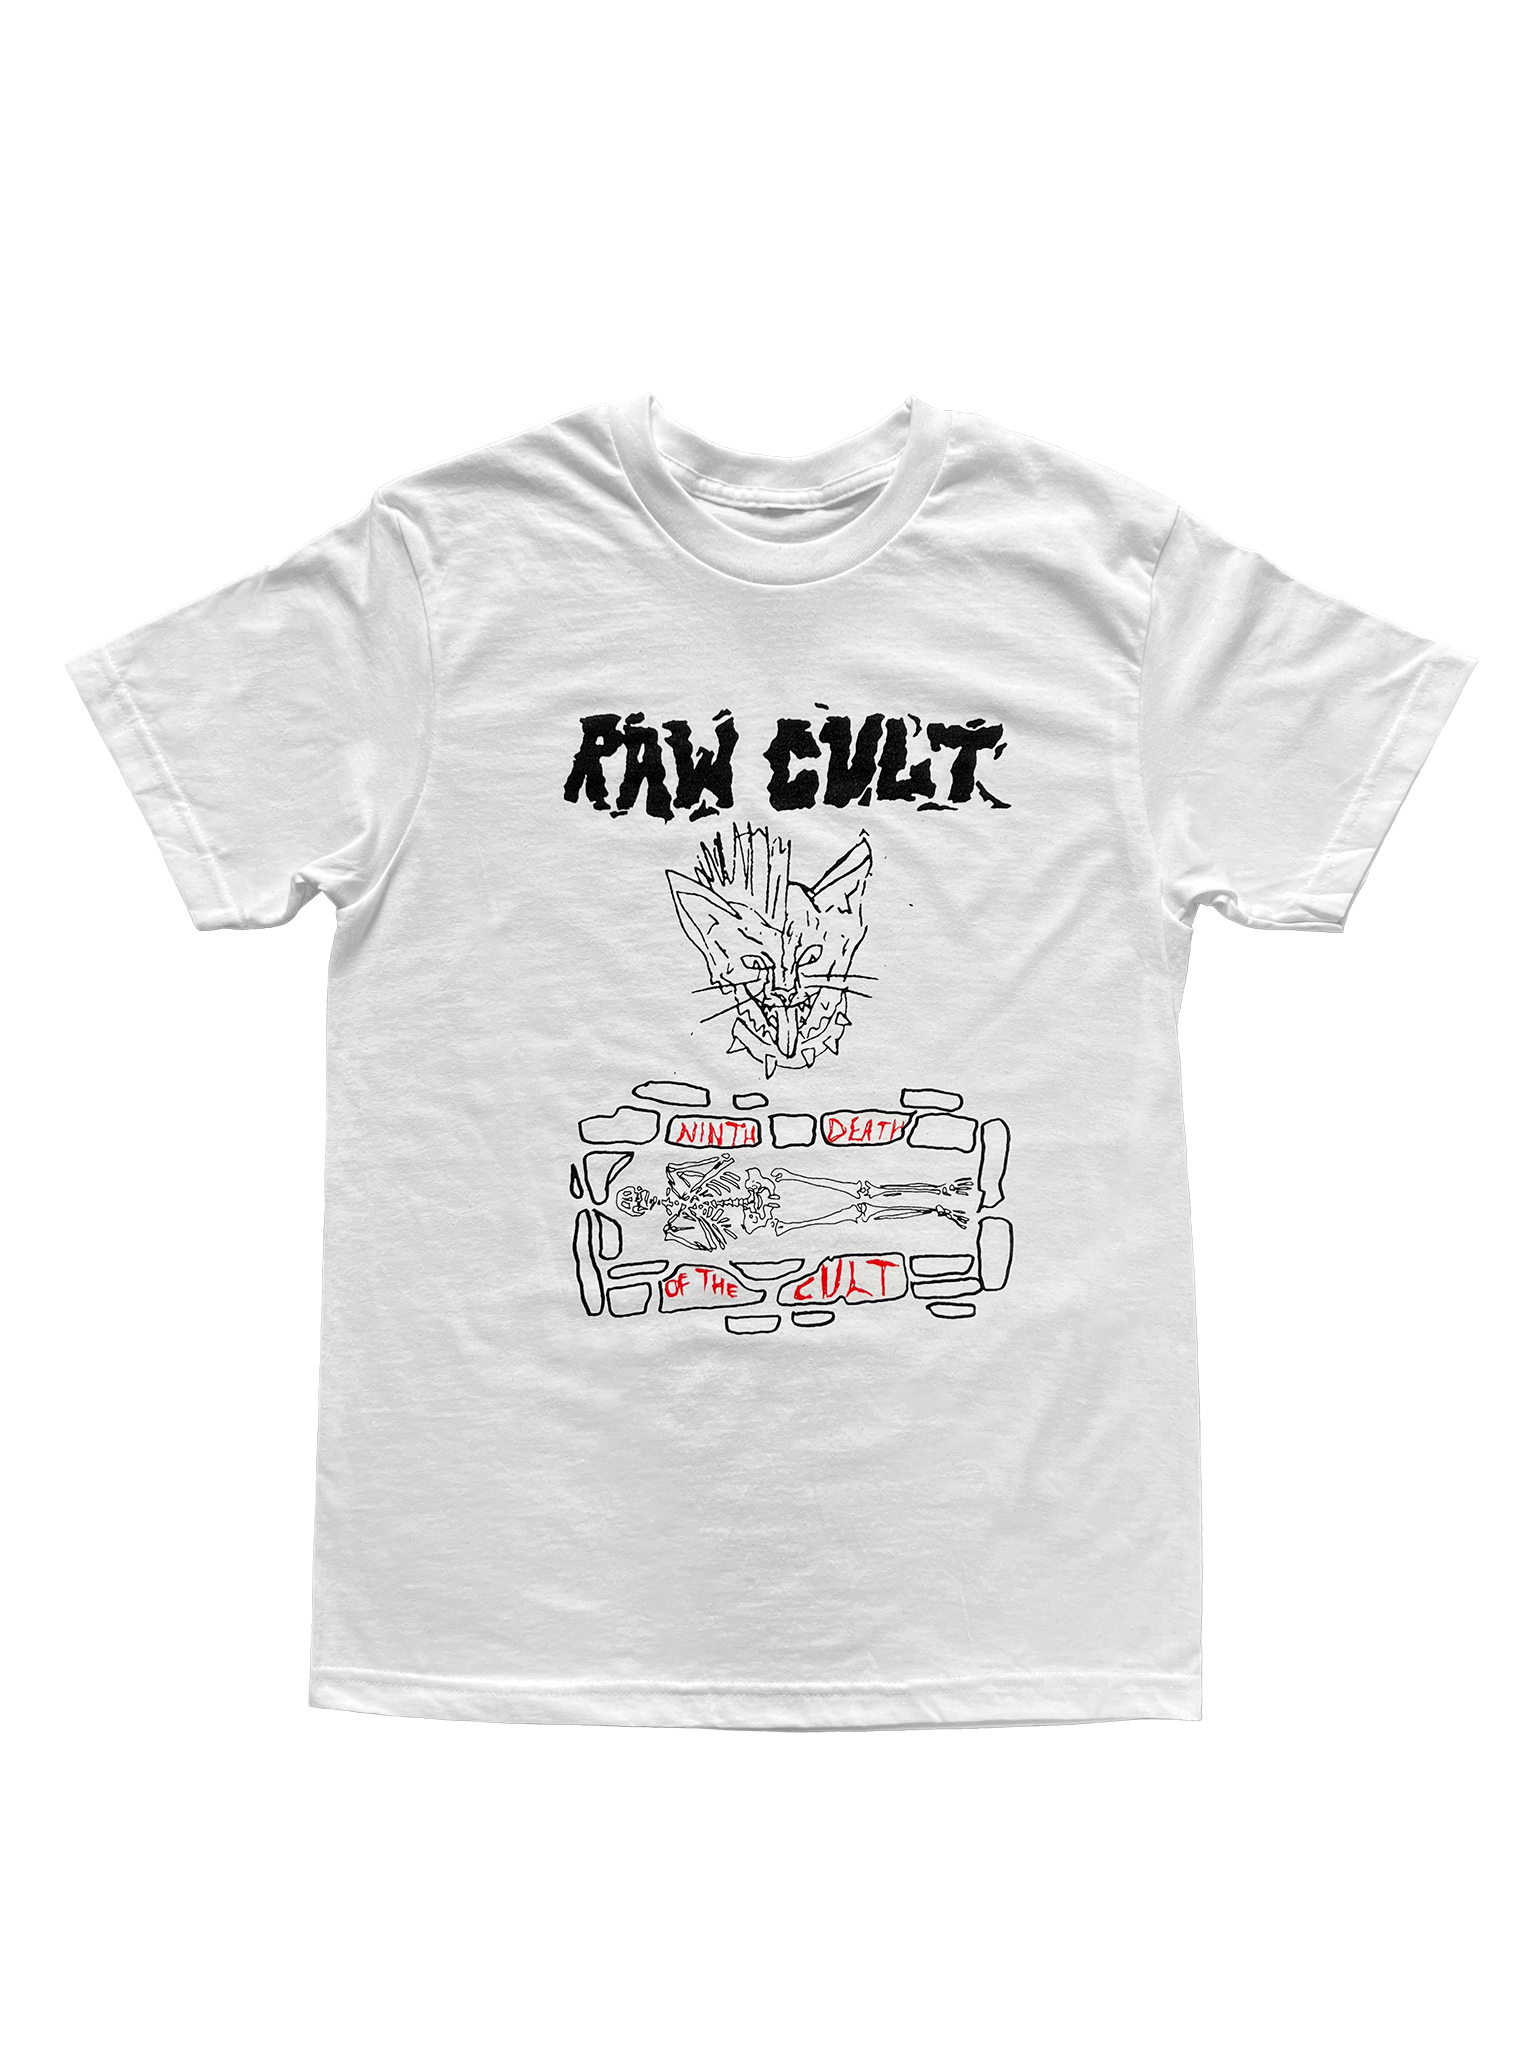 RAW CULT | Ninth Death of the CULT T-Shirt - White